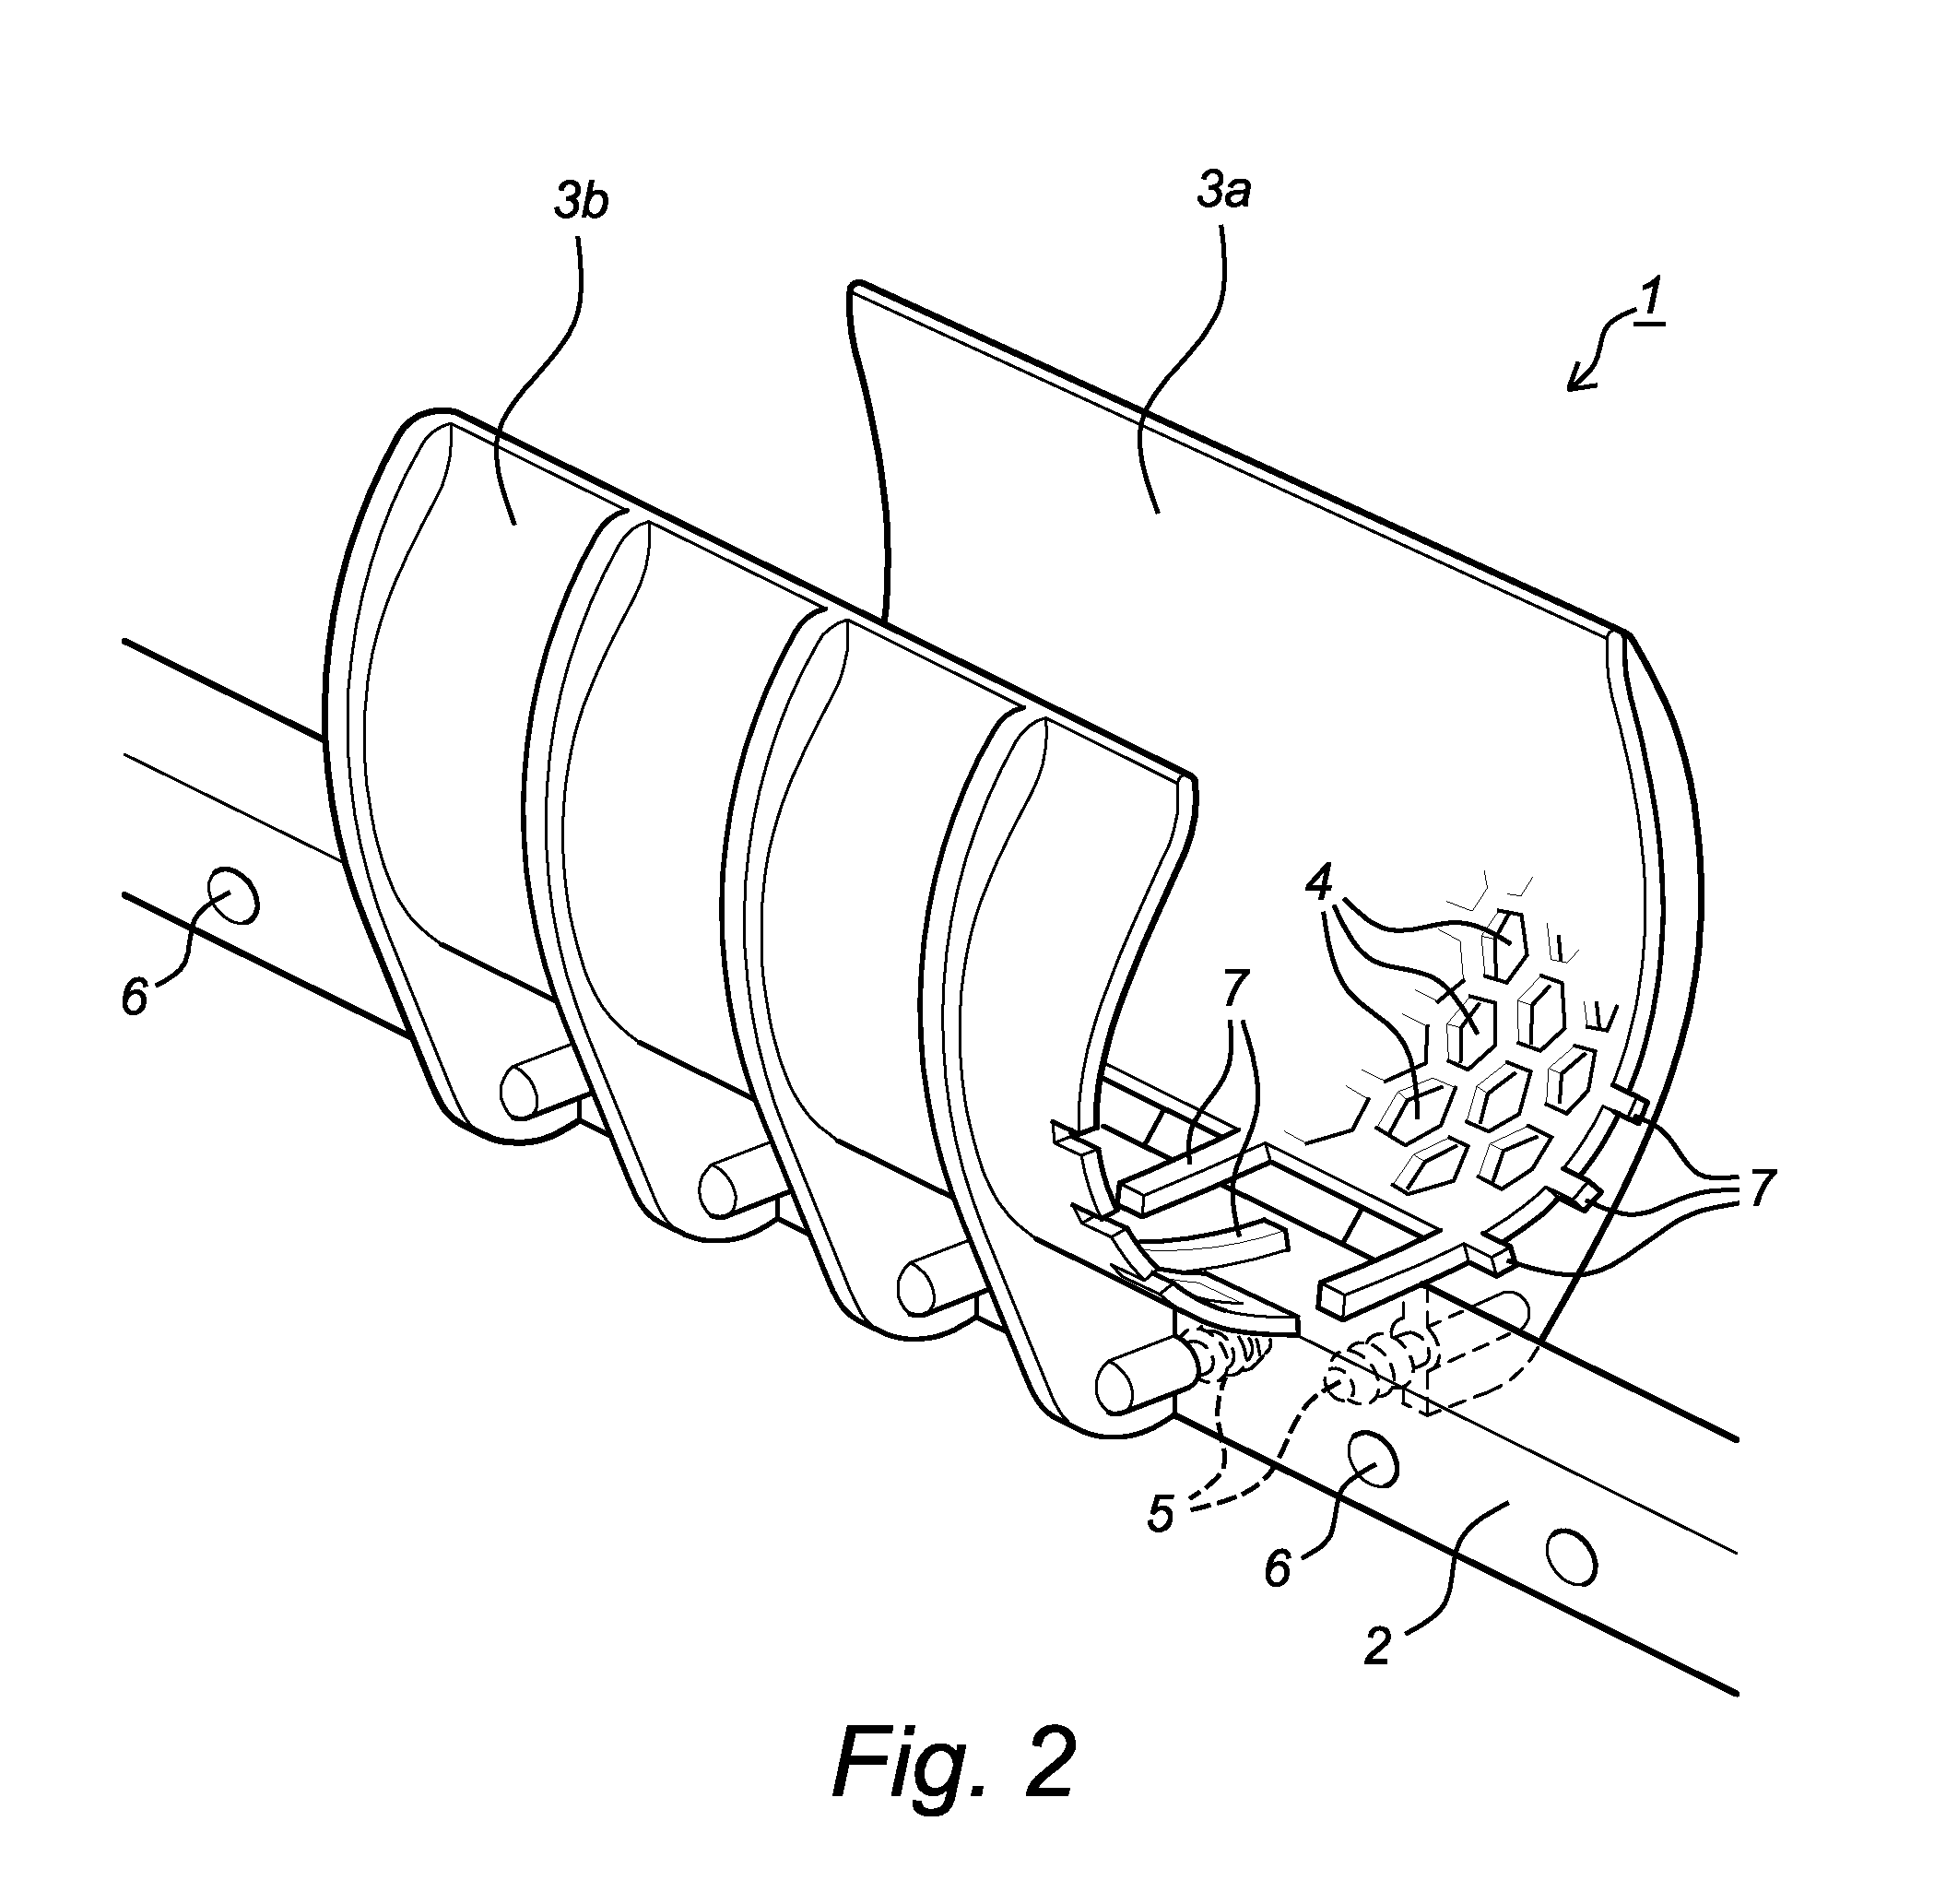 Product holder for holding food products